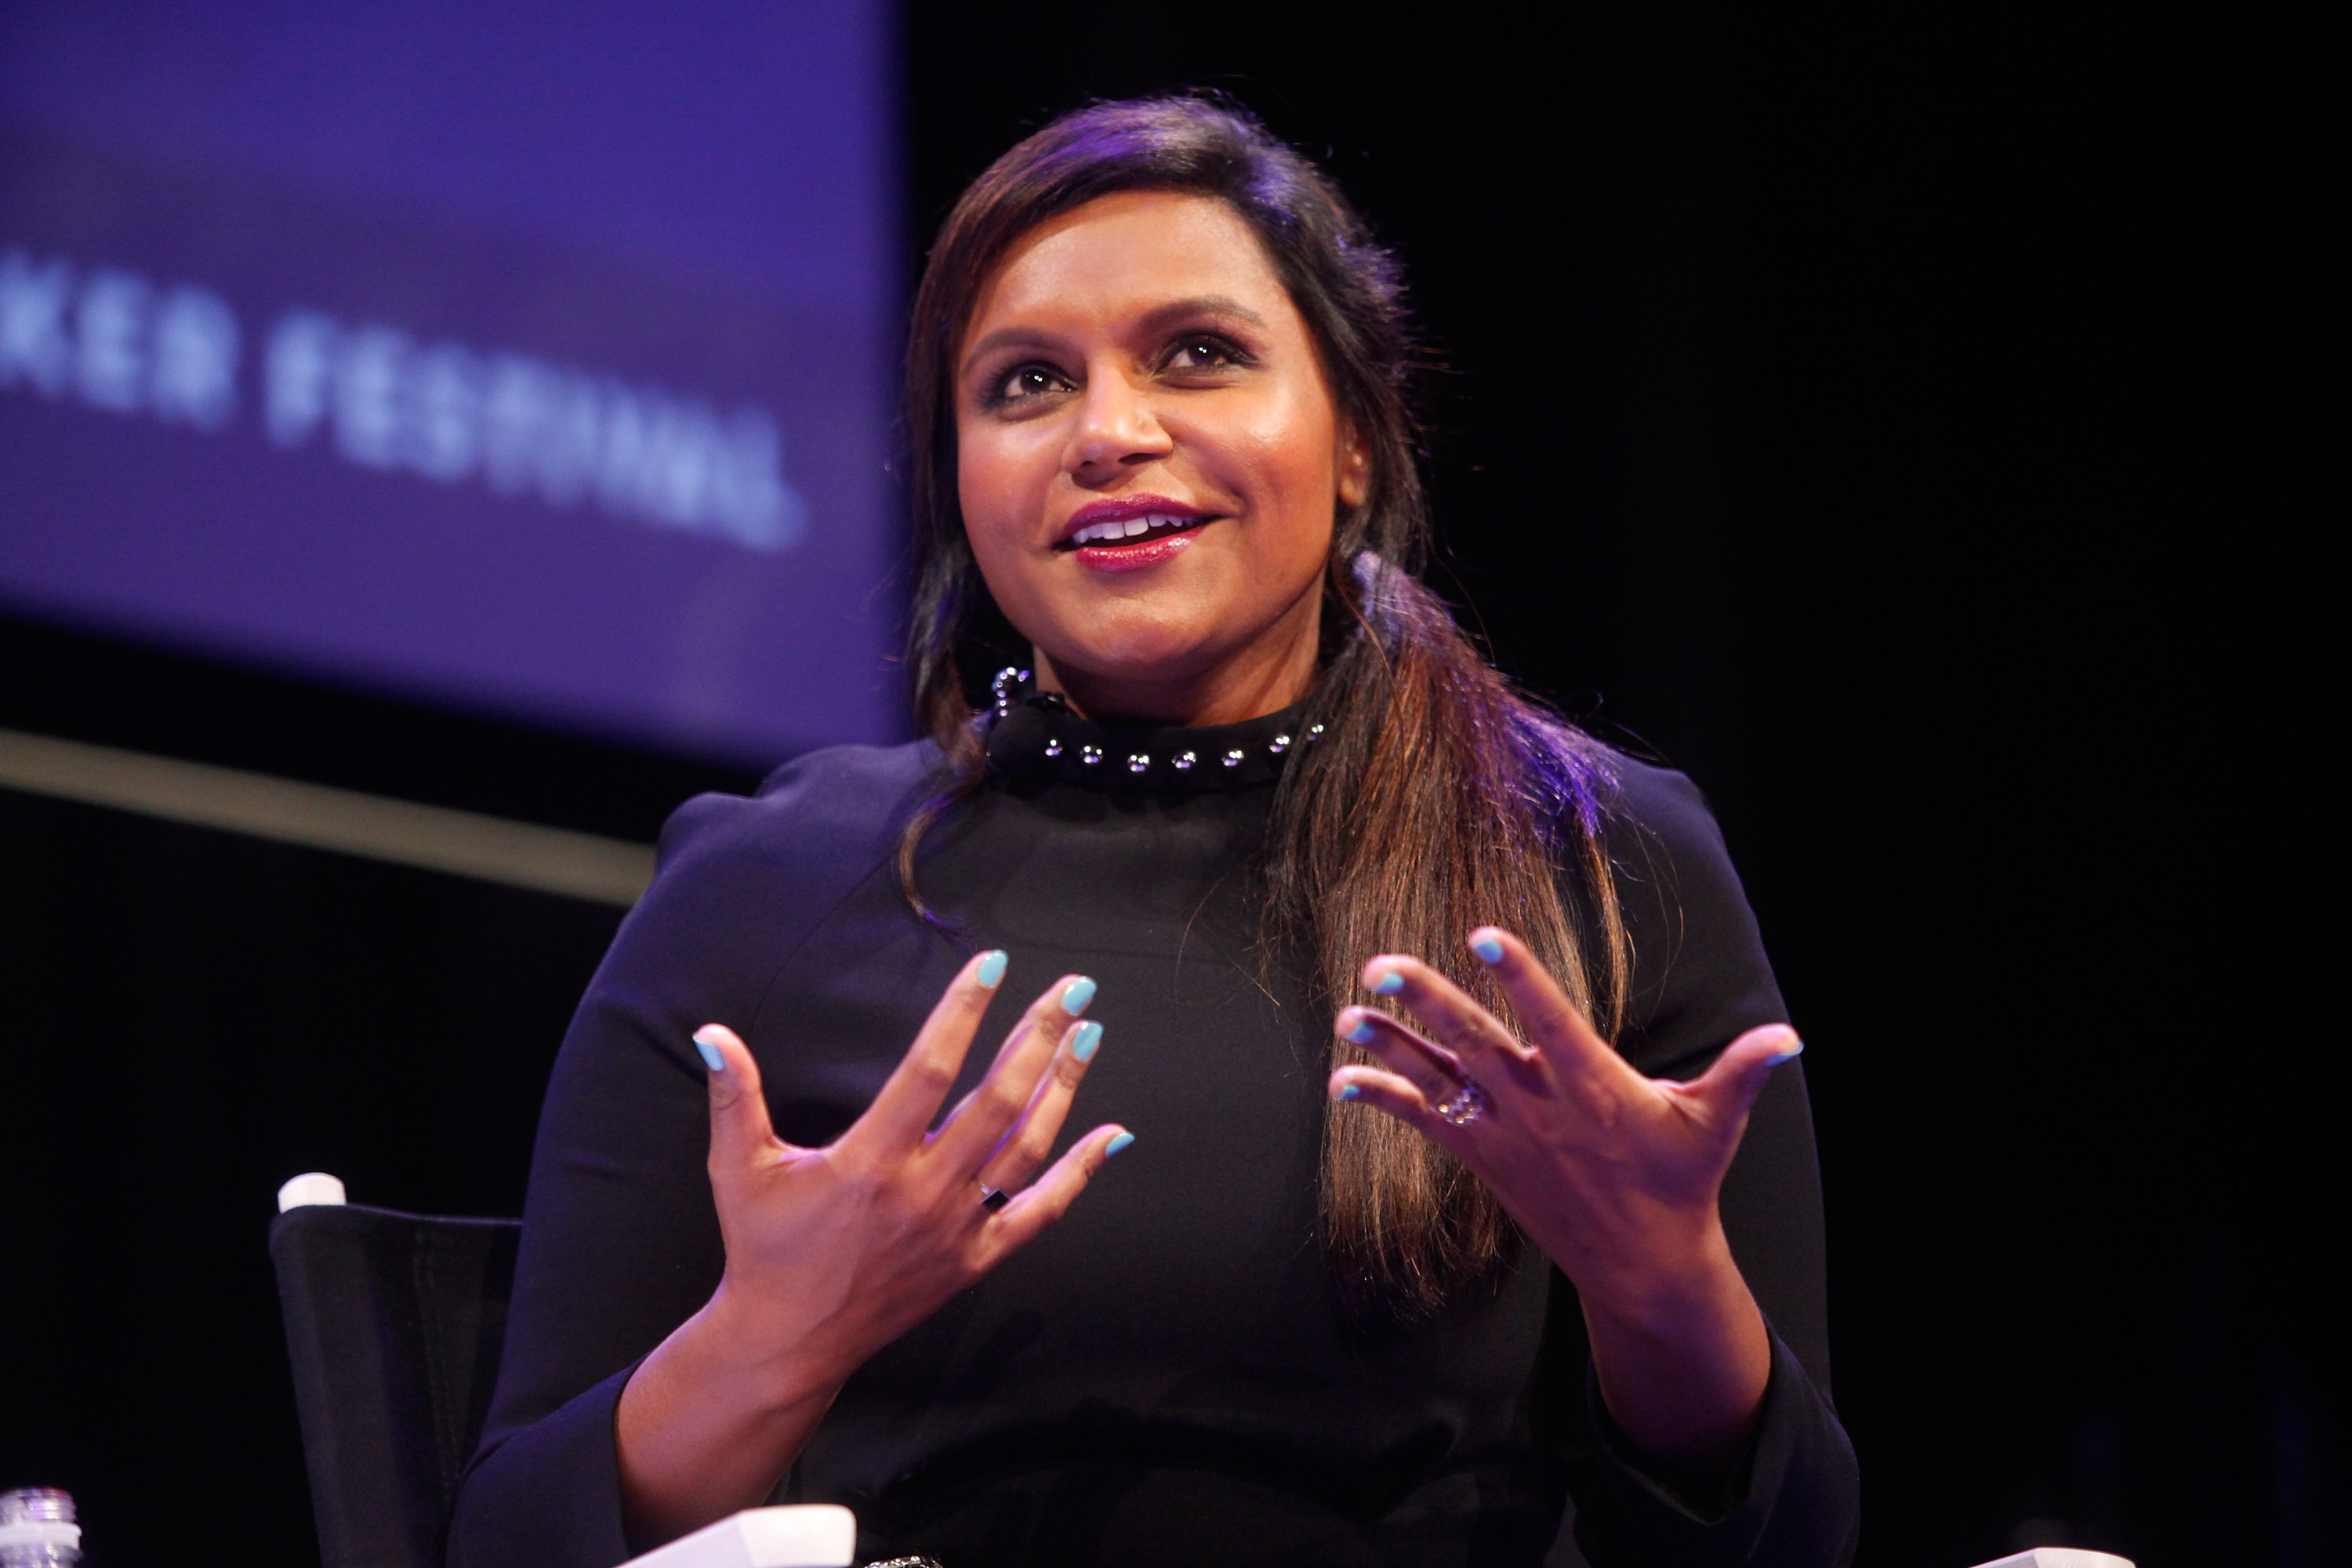 Mindy Kaling participates in a conversation with New Yorker television critic Emily Nussbaum during the New Yorker Festival on Oct. 11, 2014 in New York City. (Thos Robinson—Getty Images)